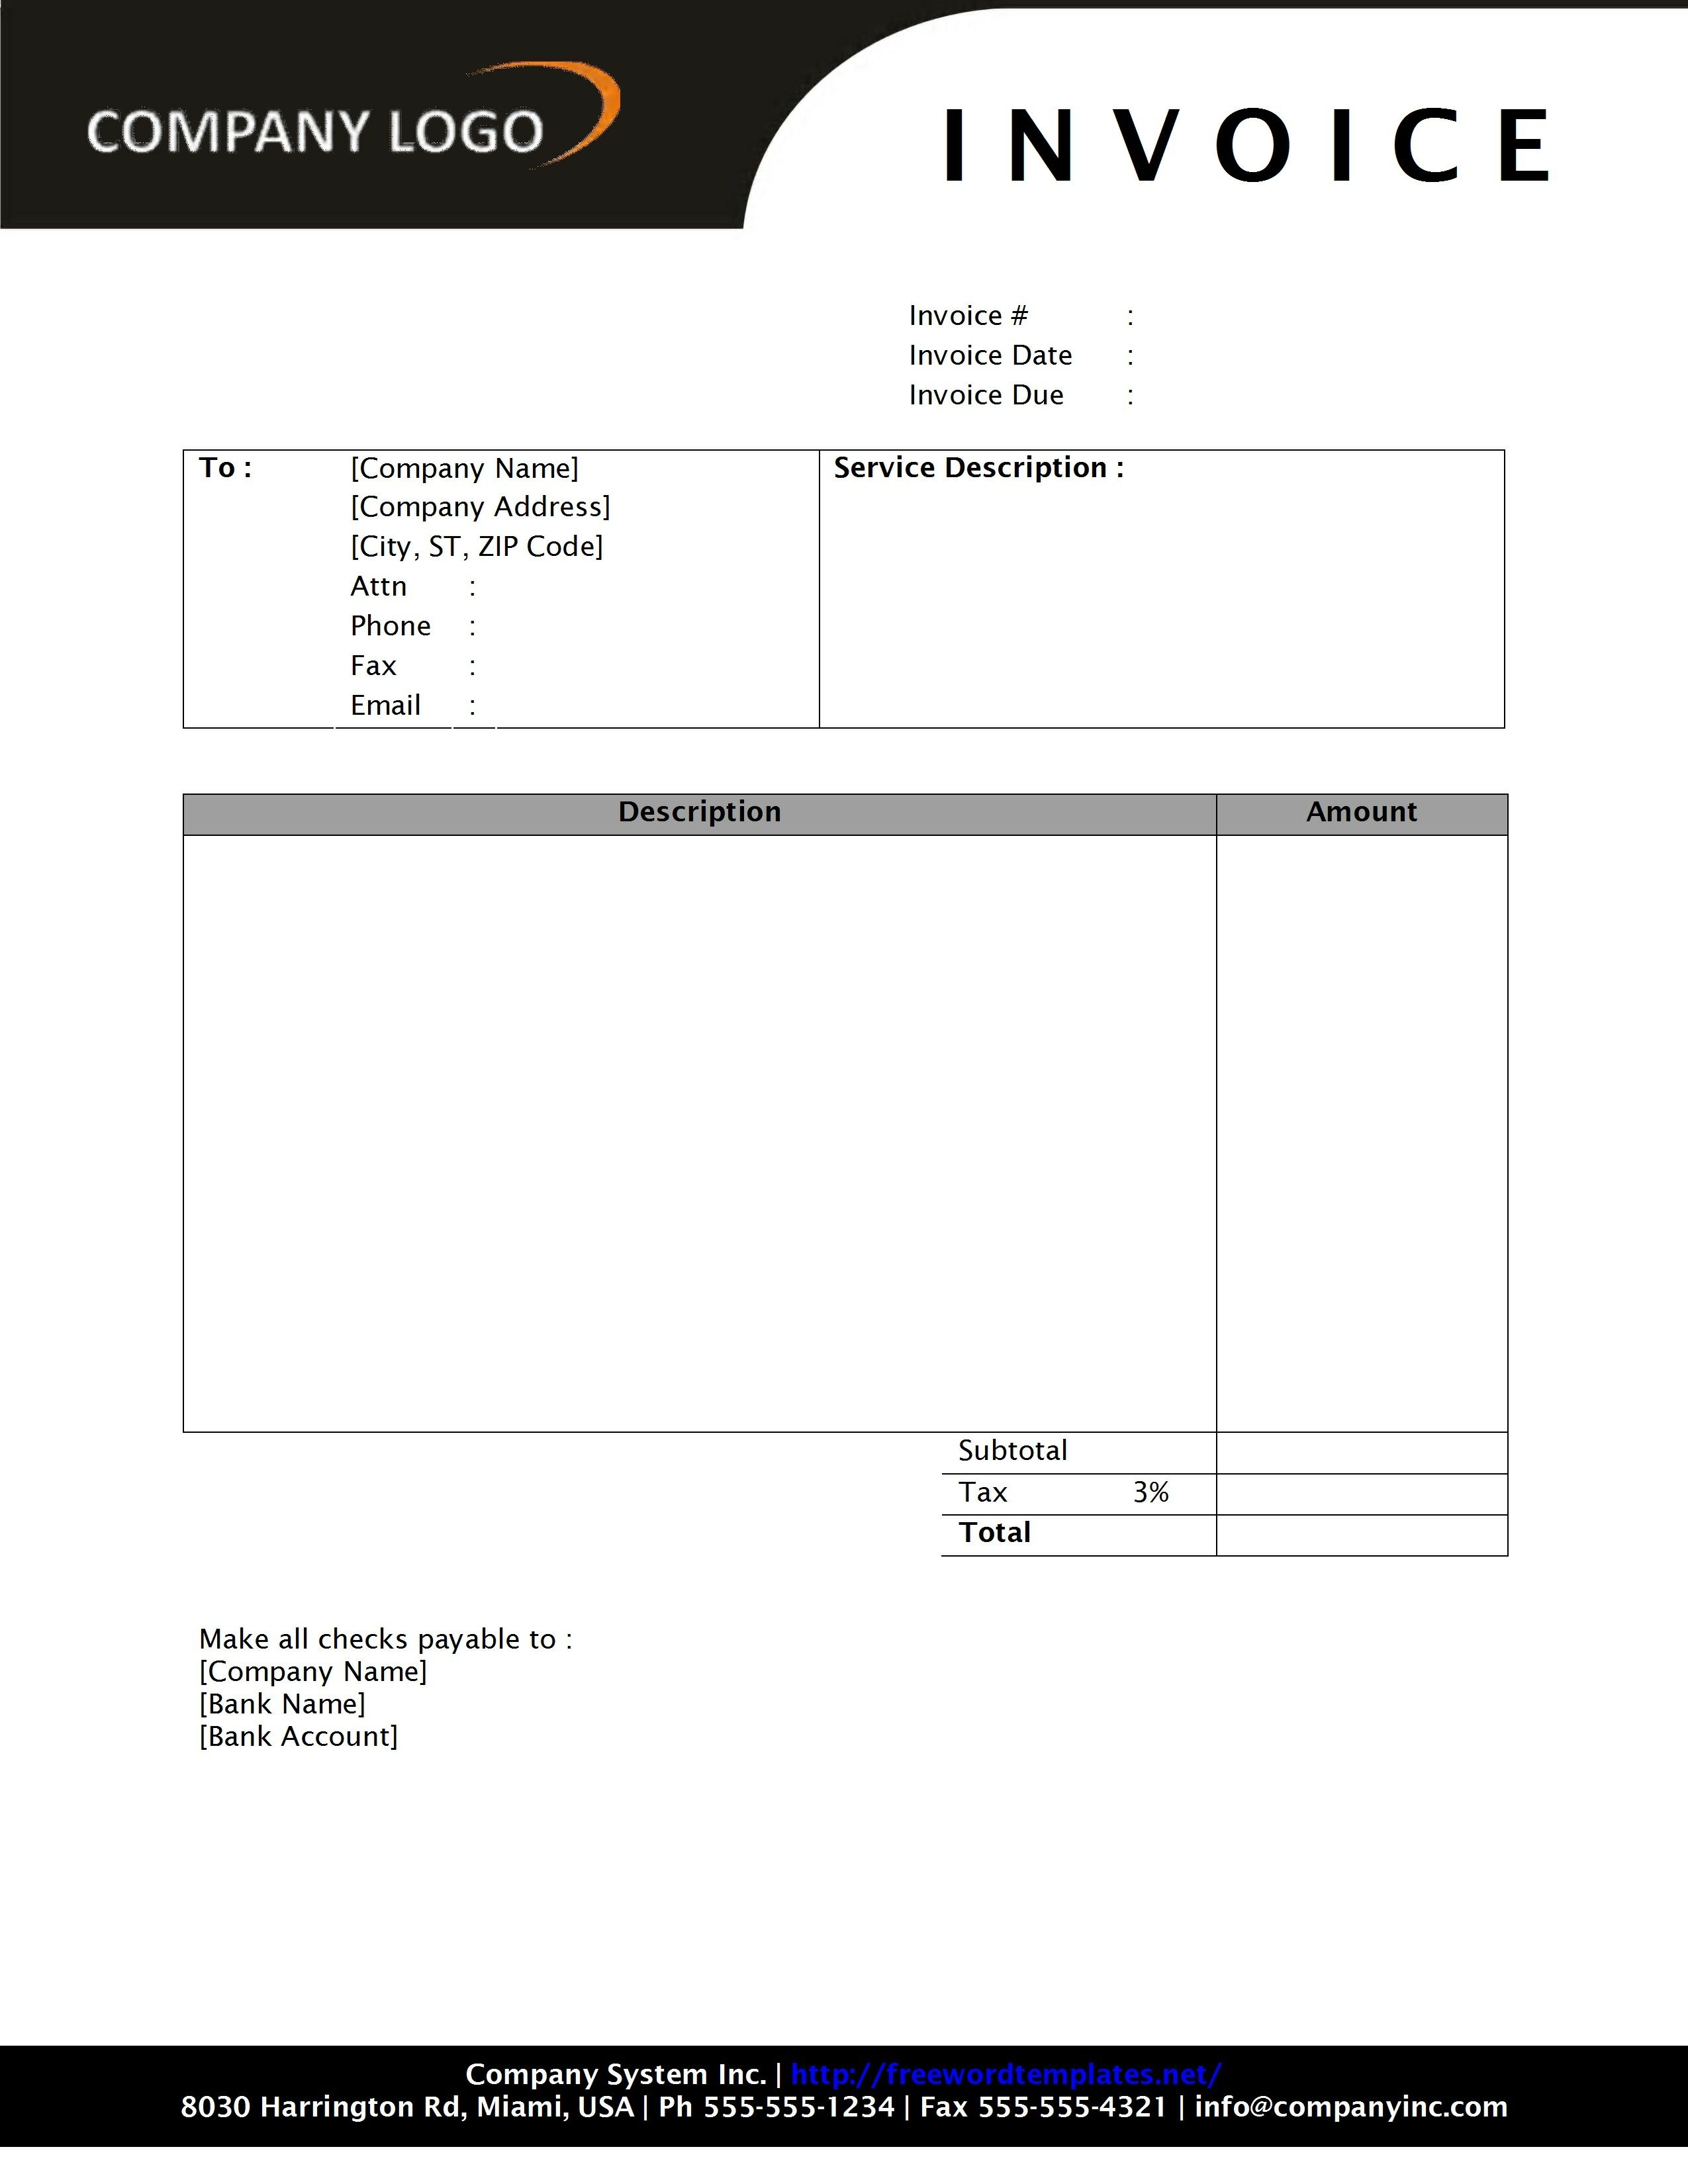 download invoice template nz notators invoice sample download